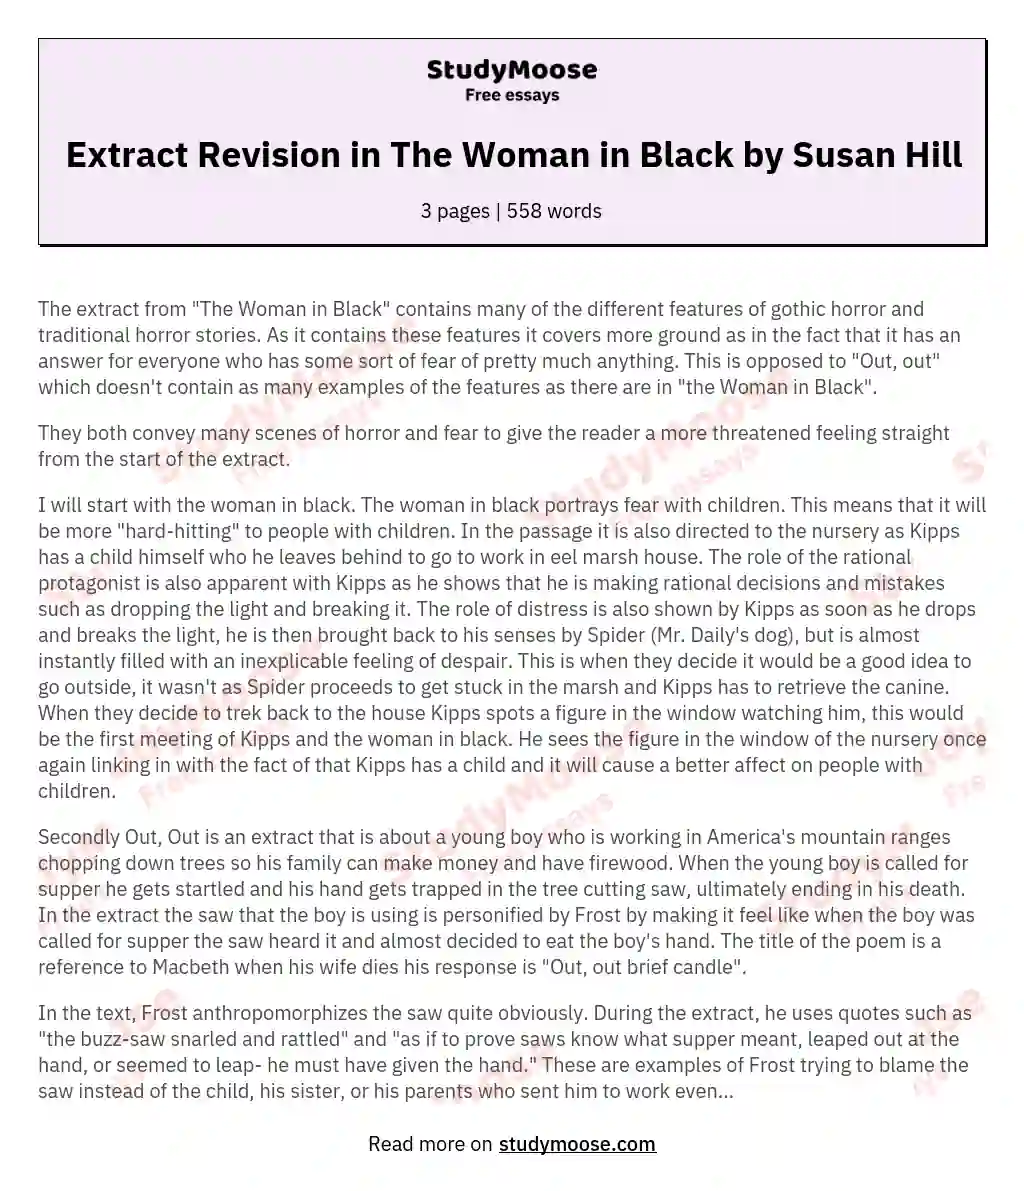 Extract Revision in The Woman in Black by Susan Hill essay